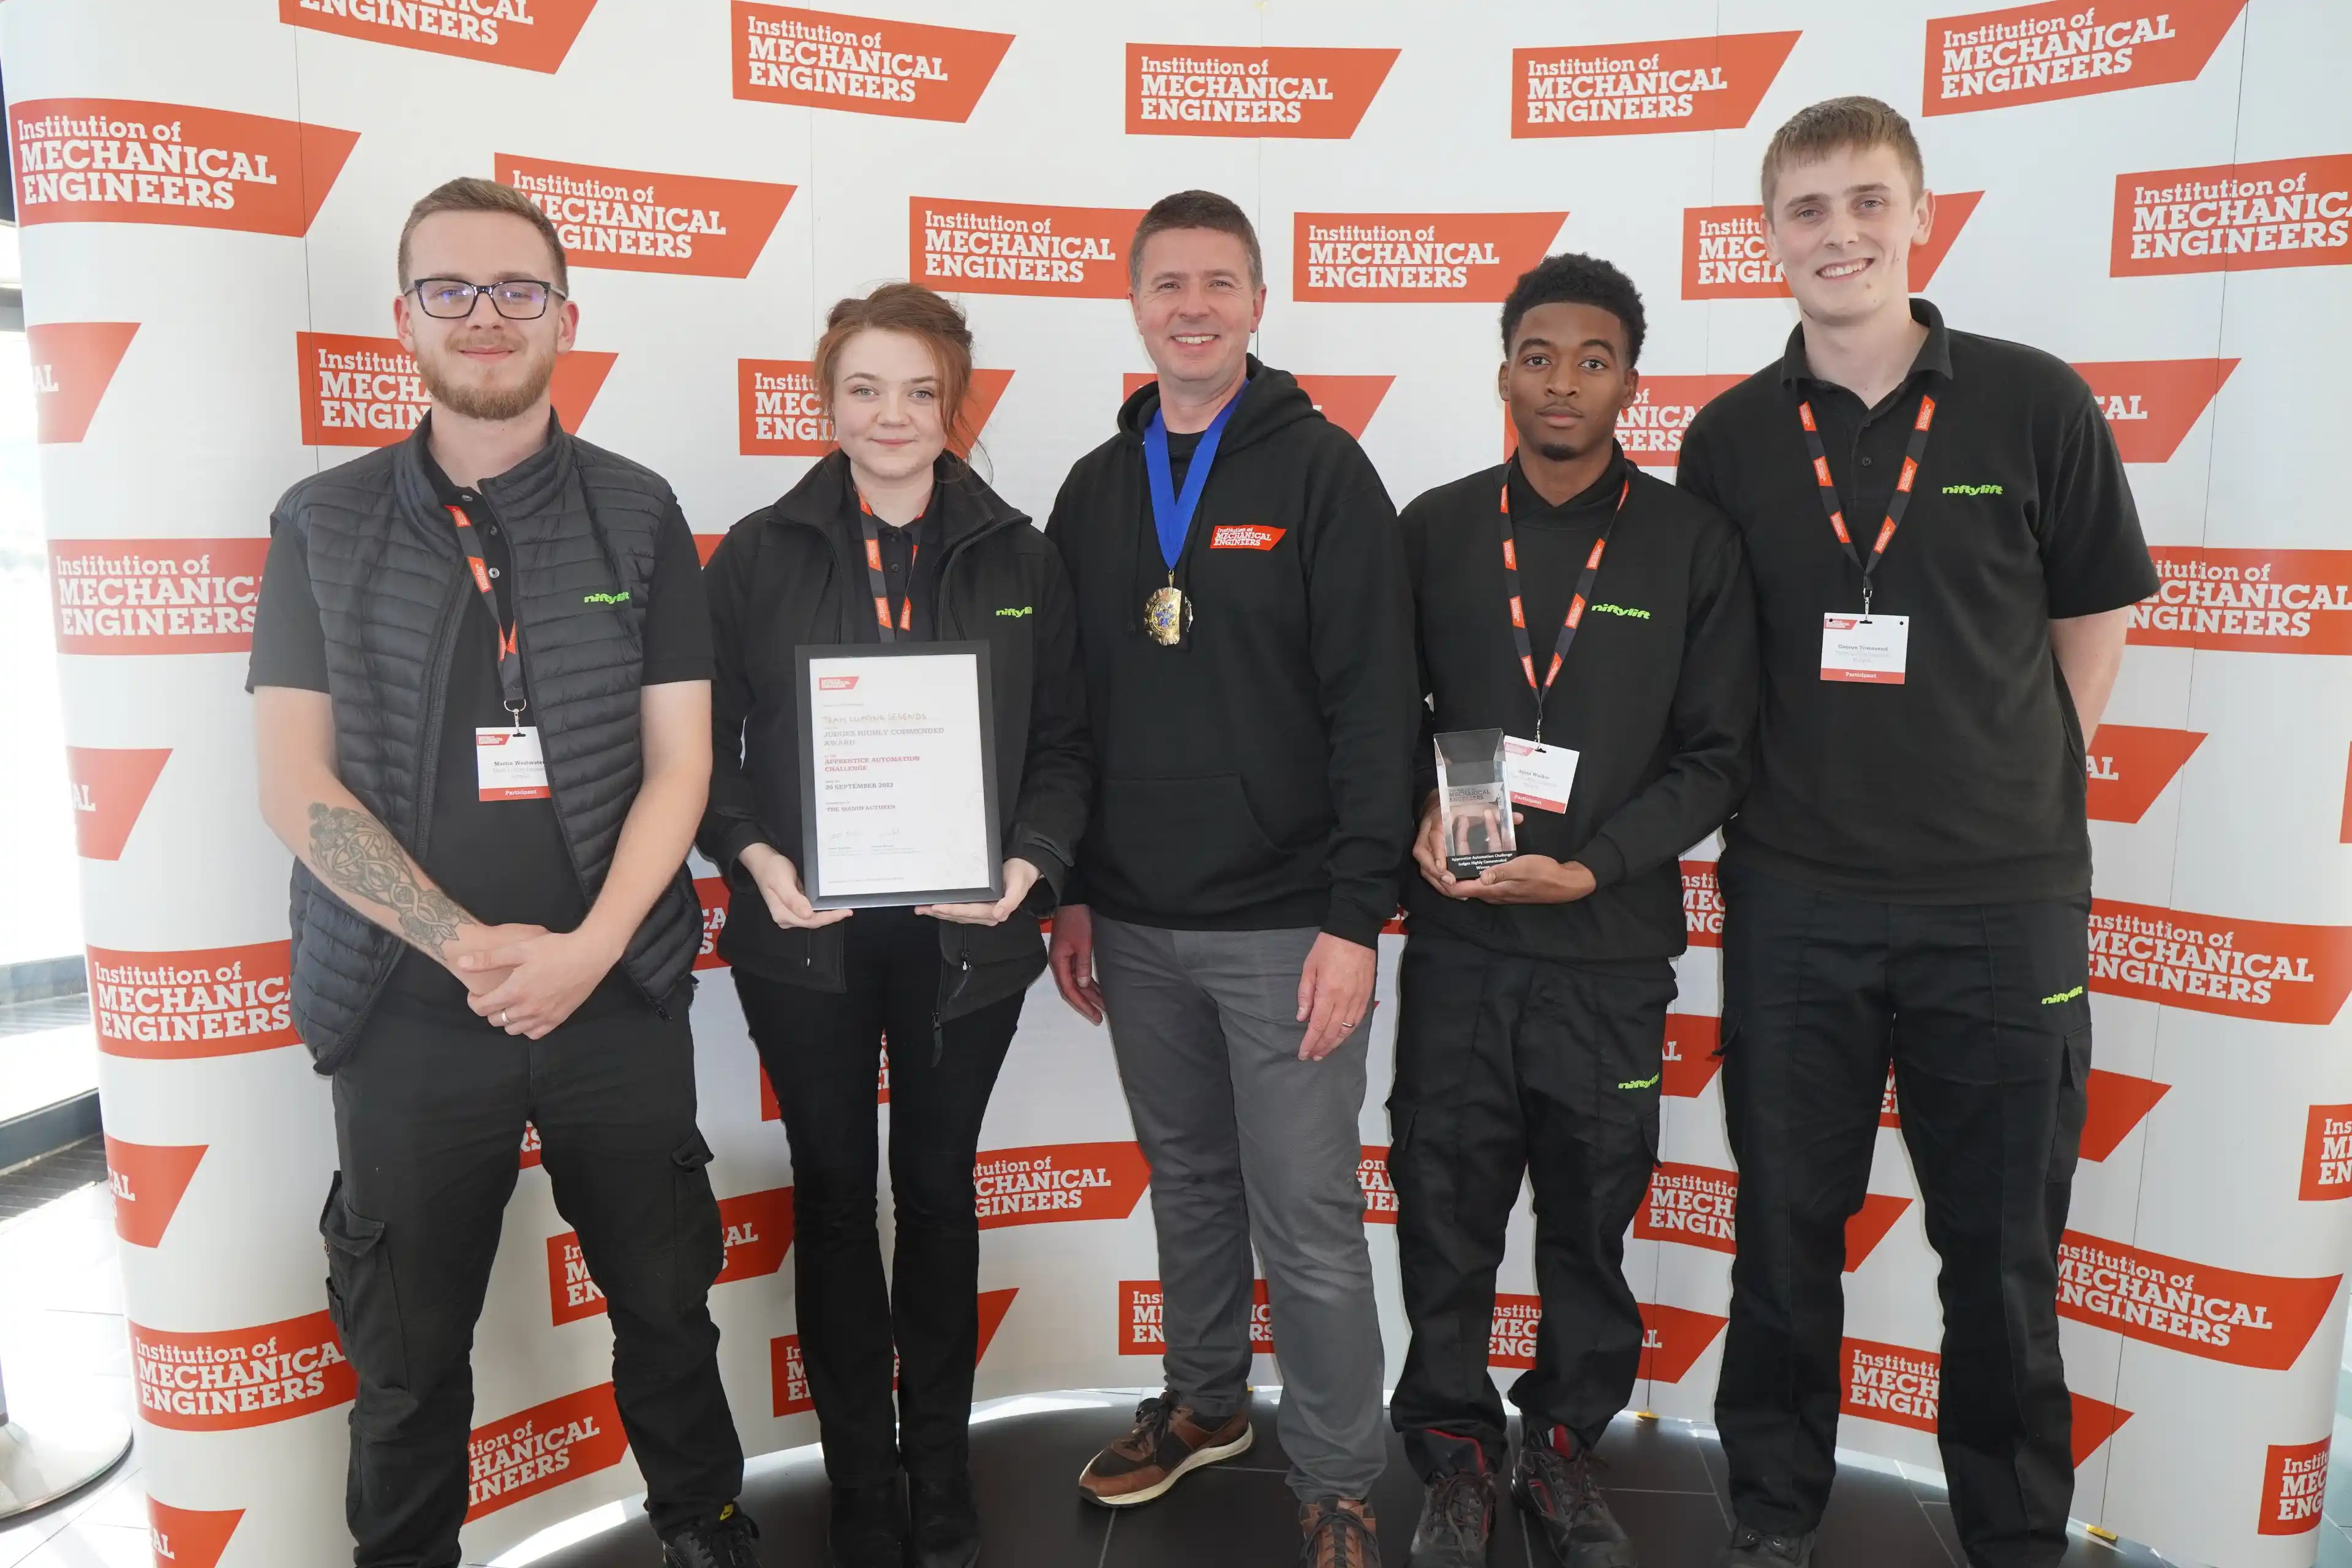 Group photo of apprentices at a competition